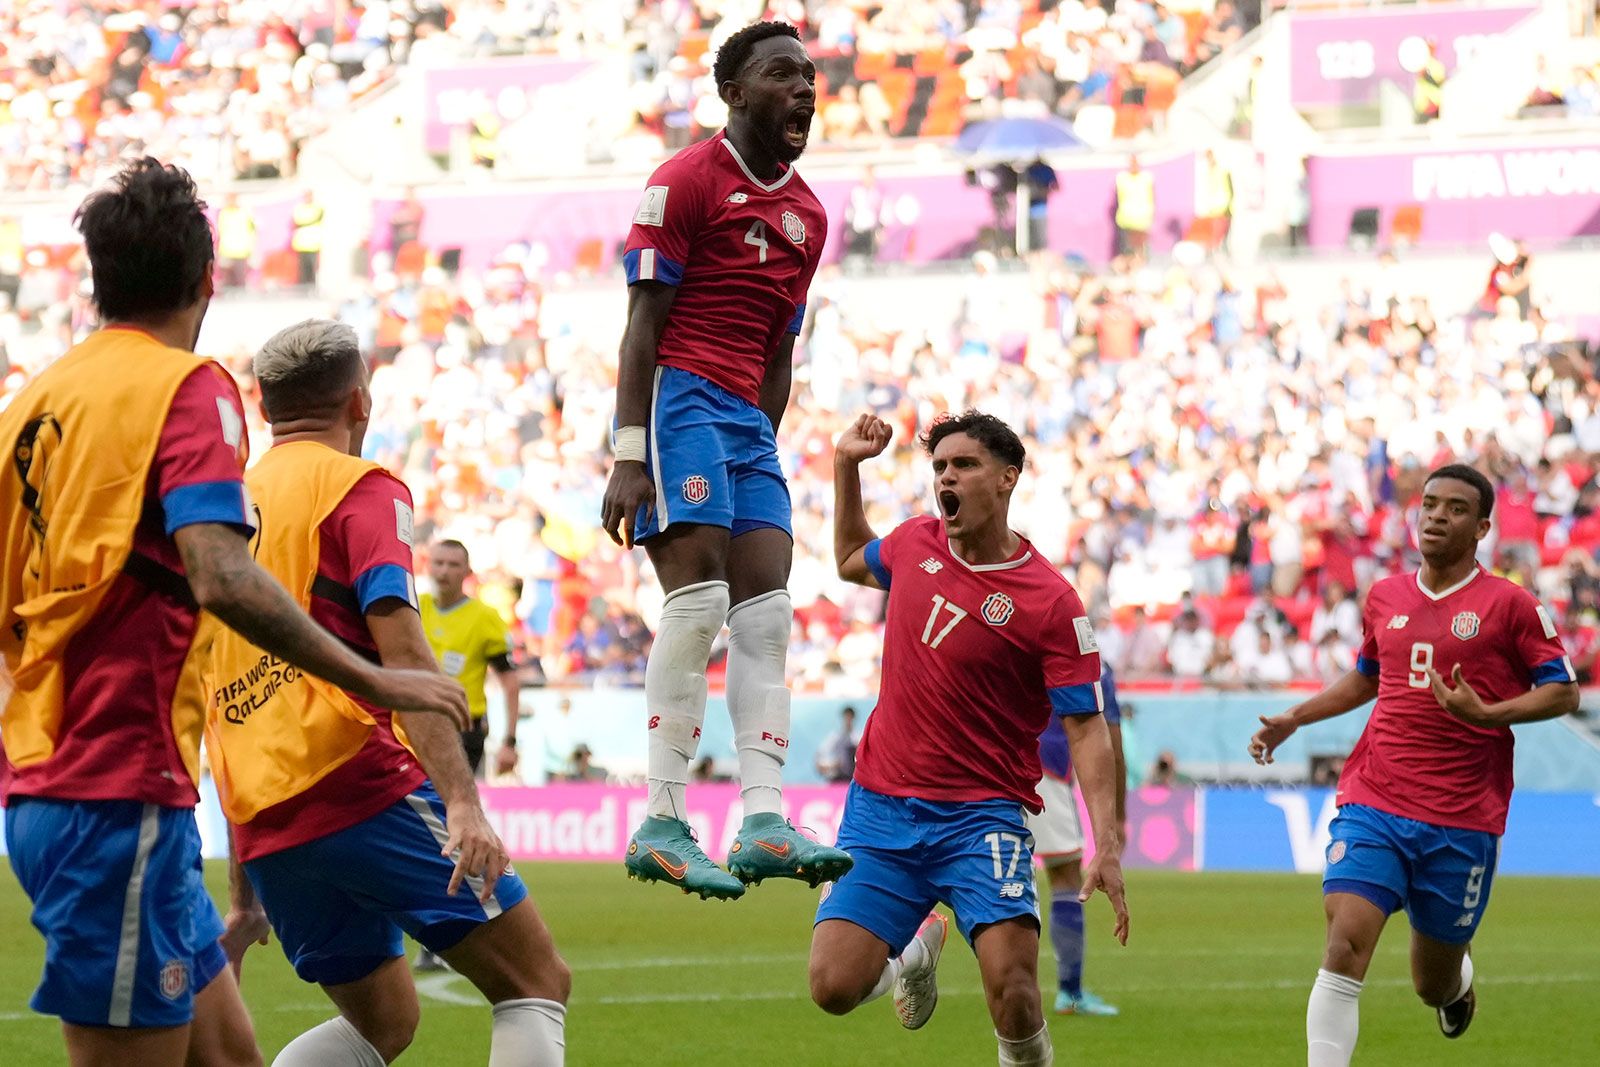 Costa Rica defeats Japan 1-0 in the second round of the World Cup